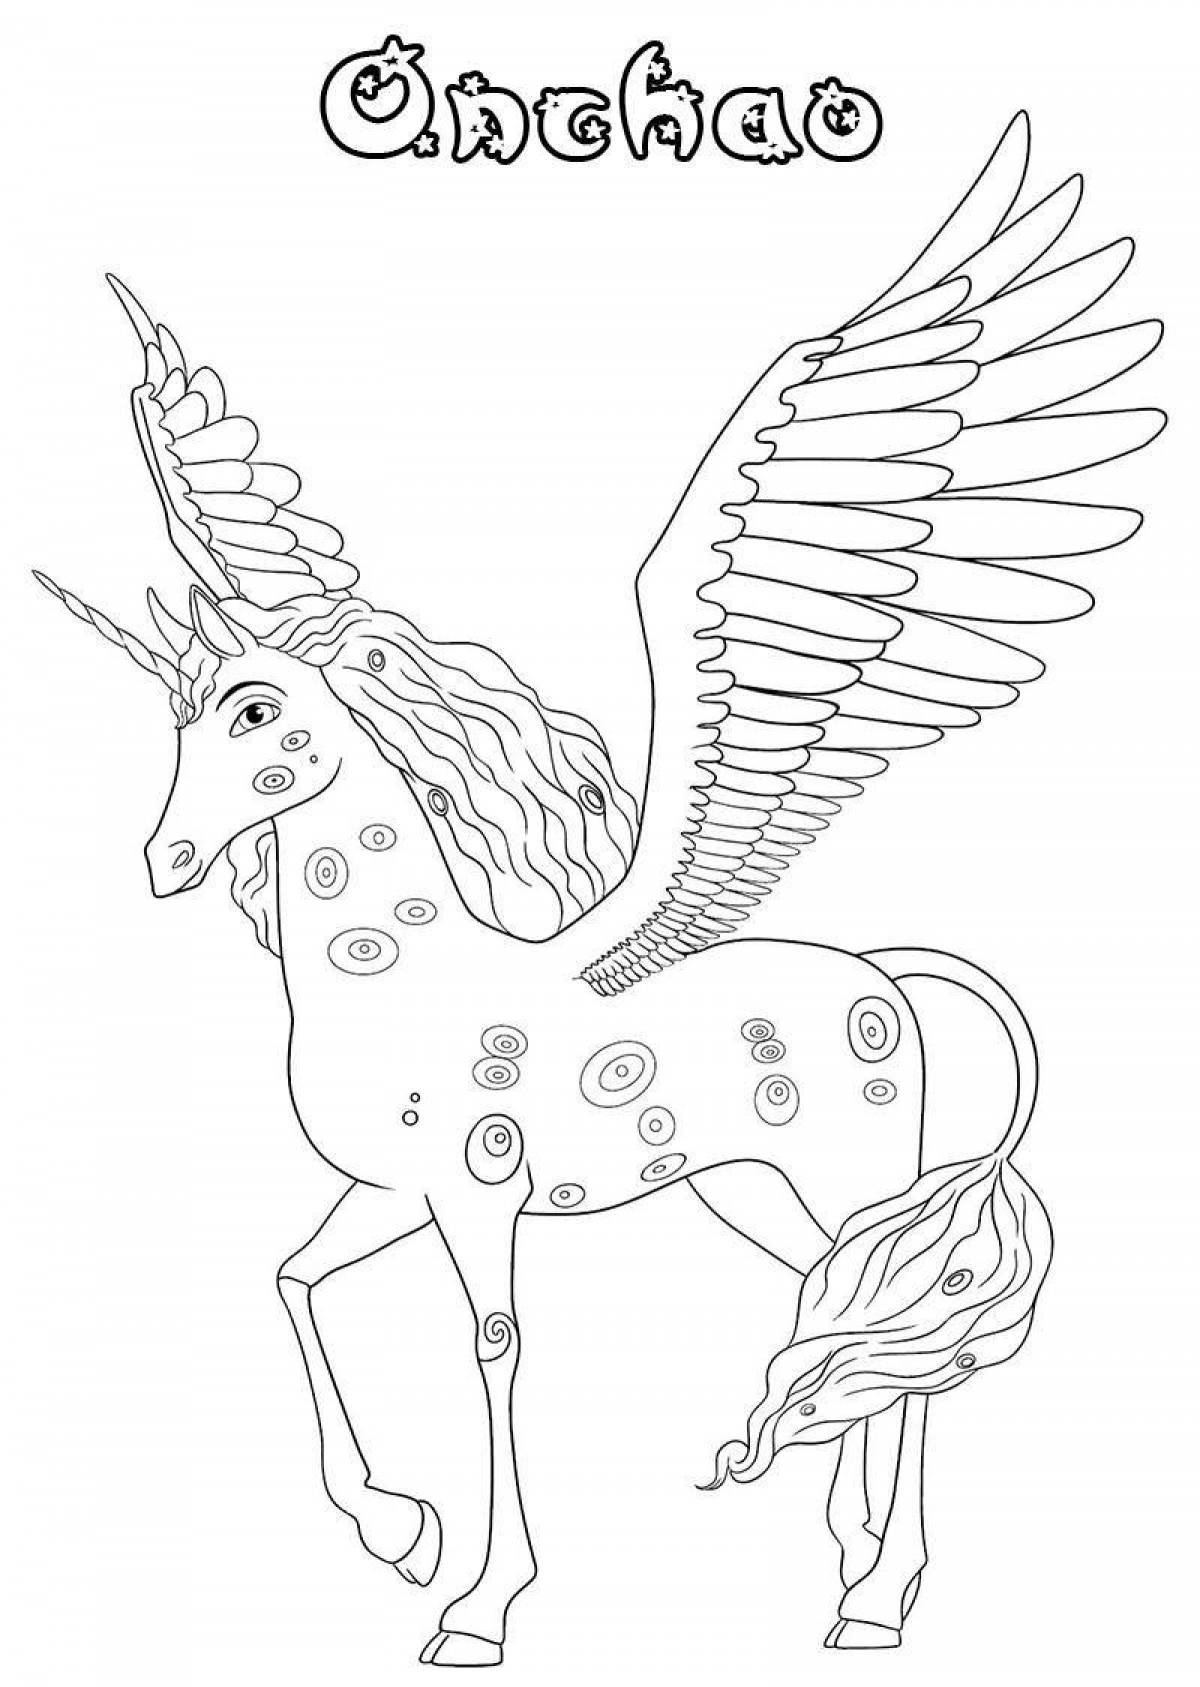 Colorful oncho coloring page